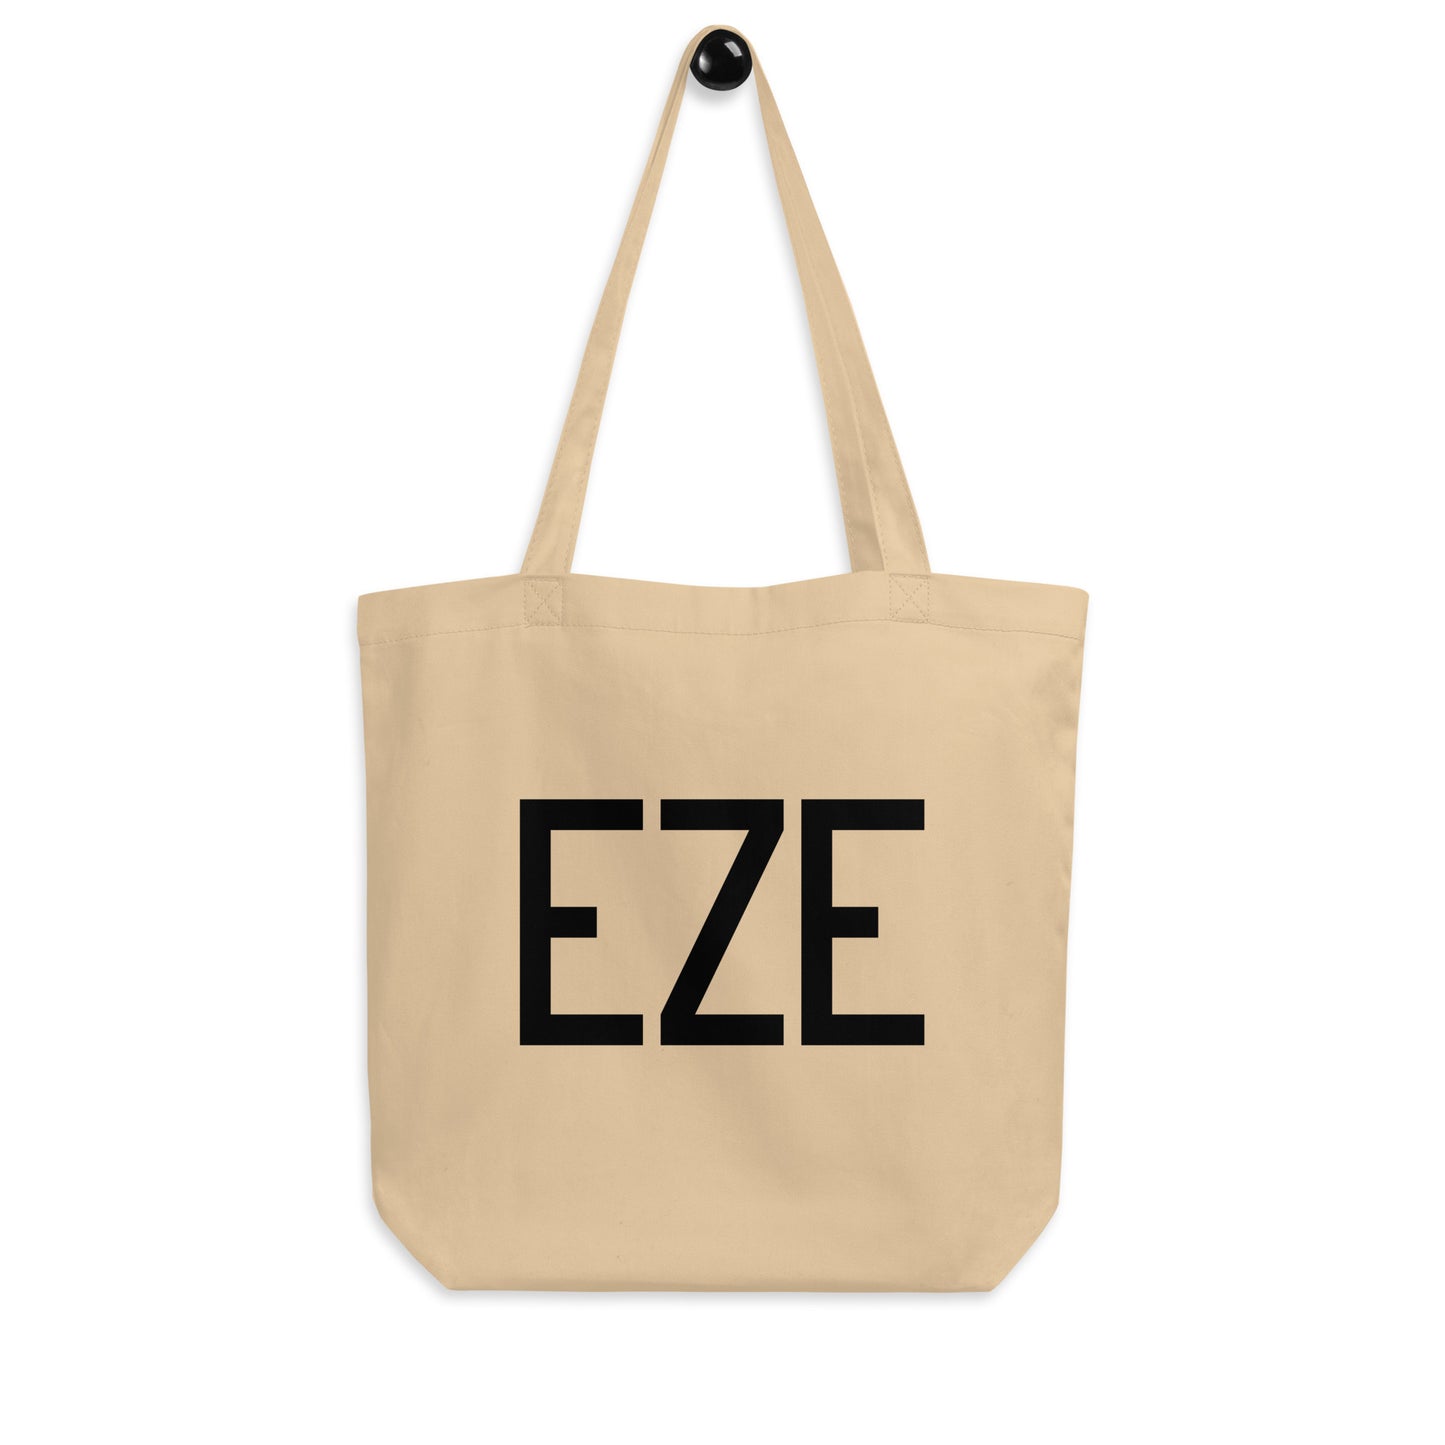 Aviation Gift Organic Tote - Black • EZE Buenos Aires • YHM Designs - Image 04